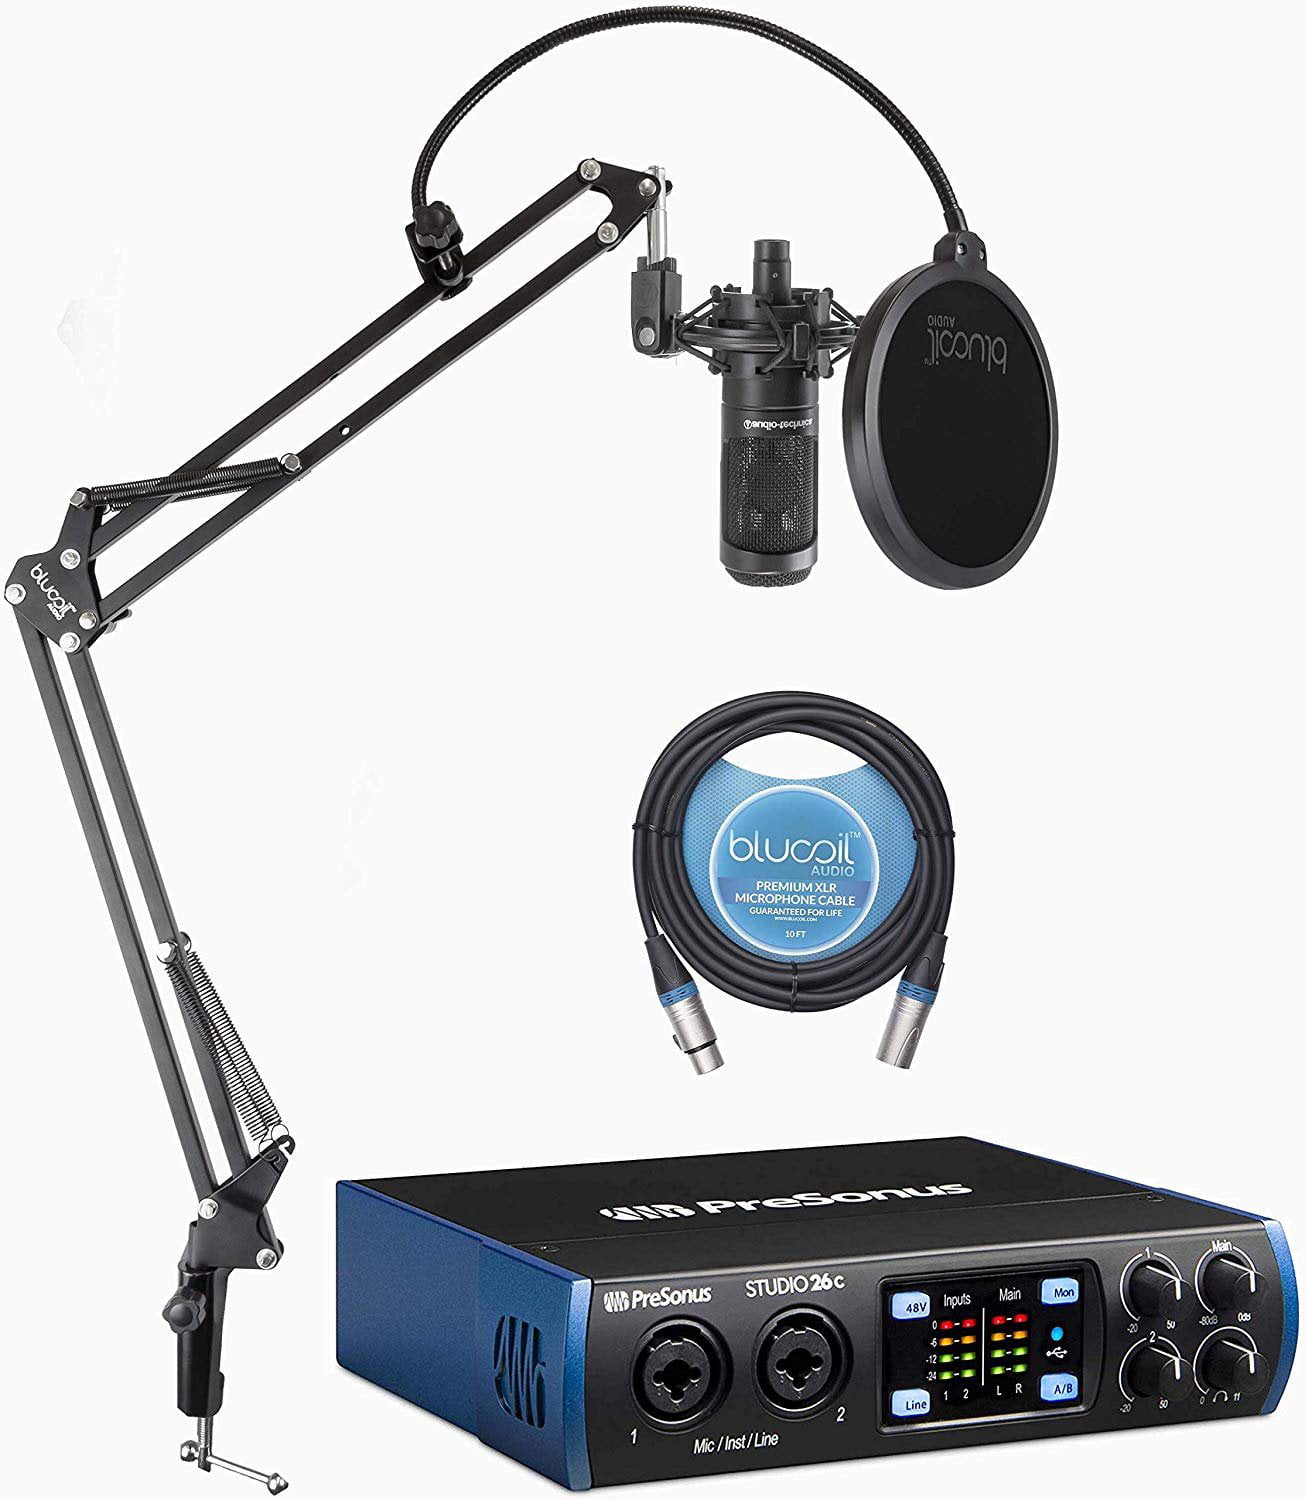 Boom Arm Plus Pop Filter Podcasting & Streaming Bundle with Blucoil Portable USB Audio Interface for Windows and Mac and 10' XLR Cable Audio Technica AT2035 Cardioid Condenser Microphone for Studio 